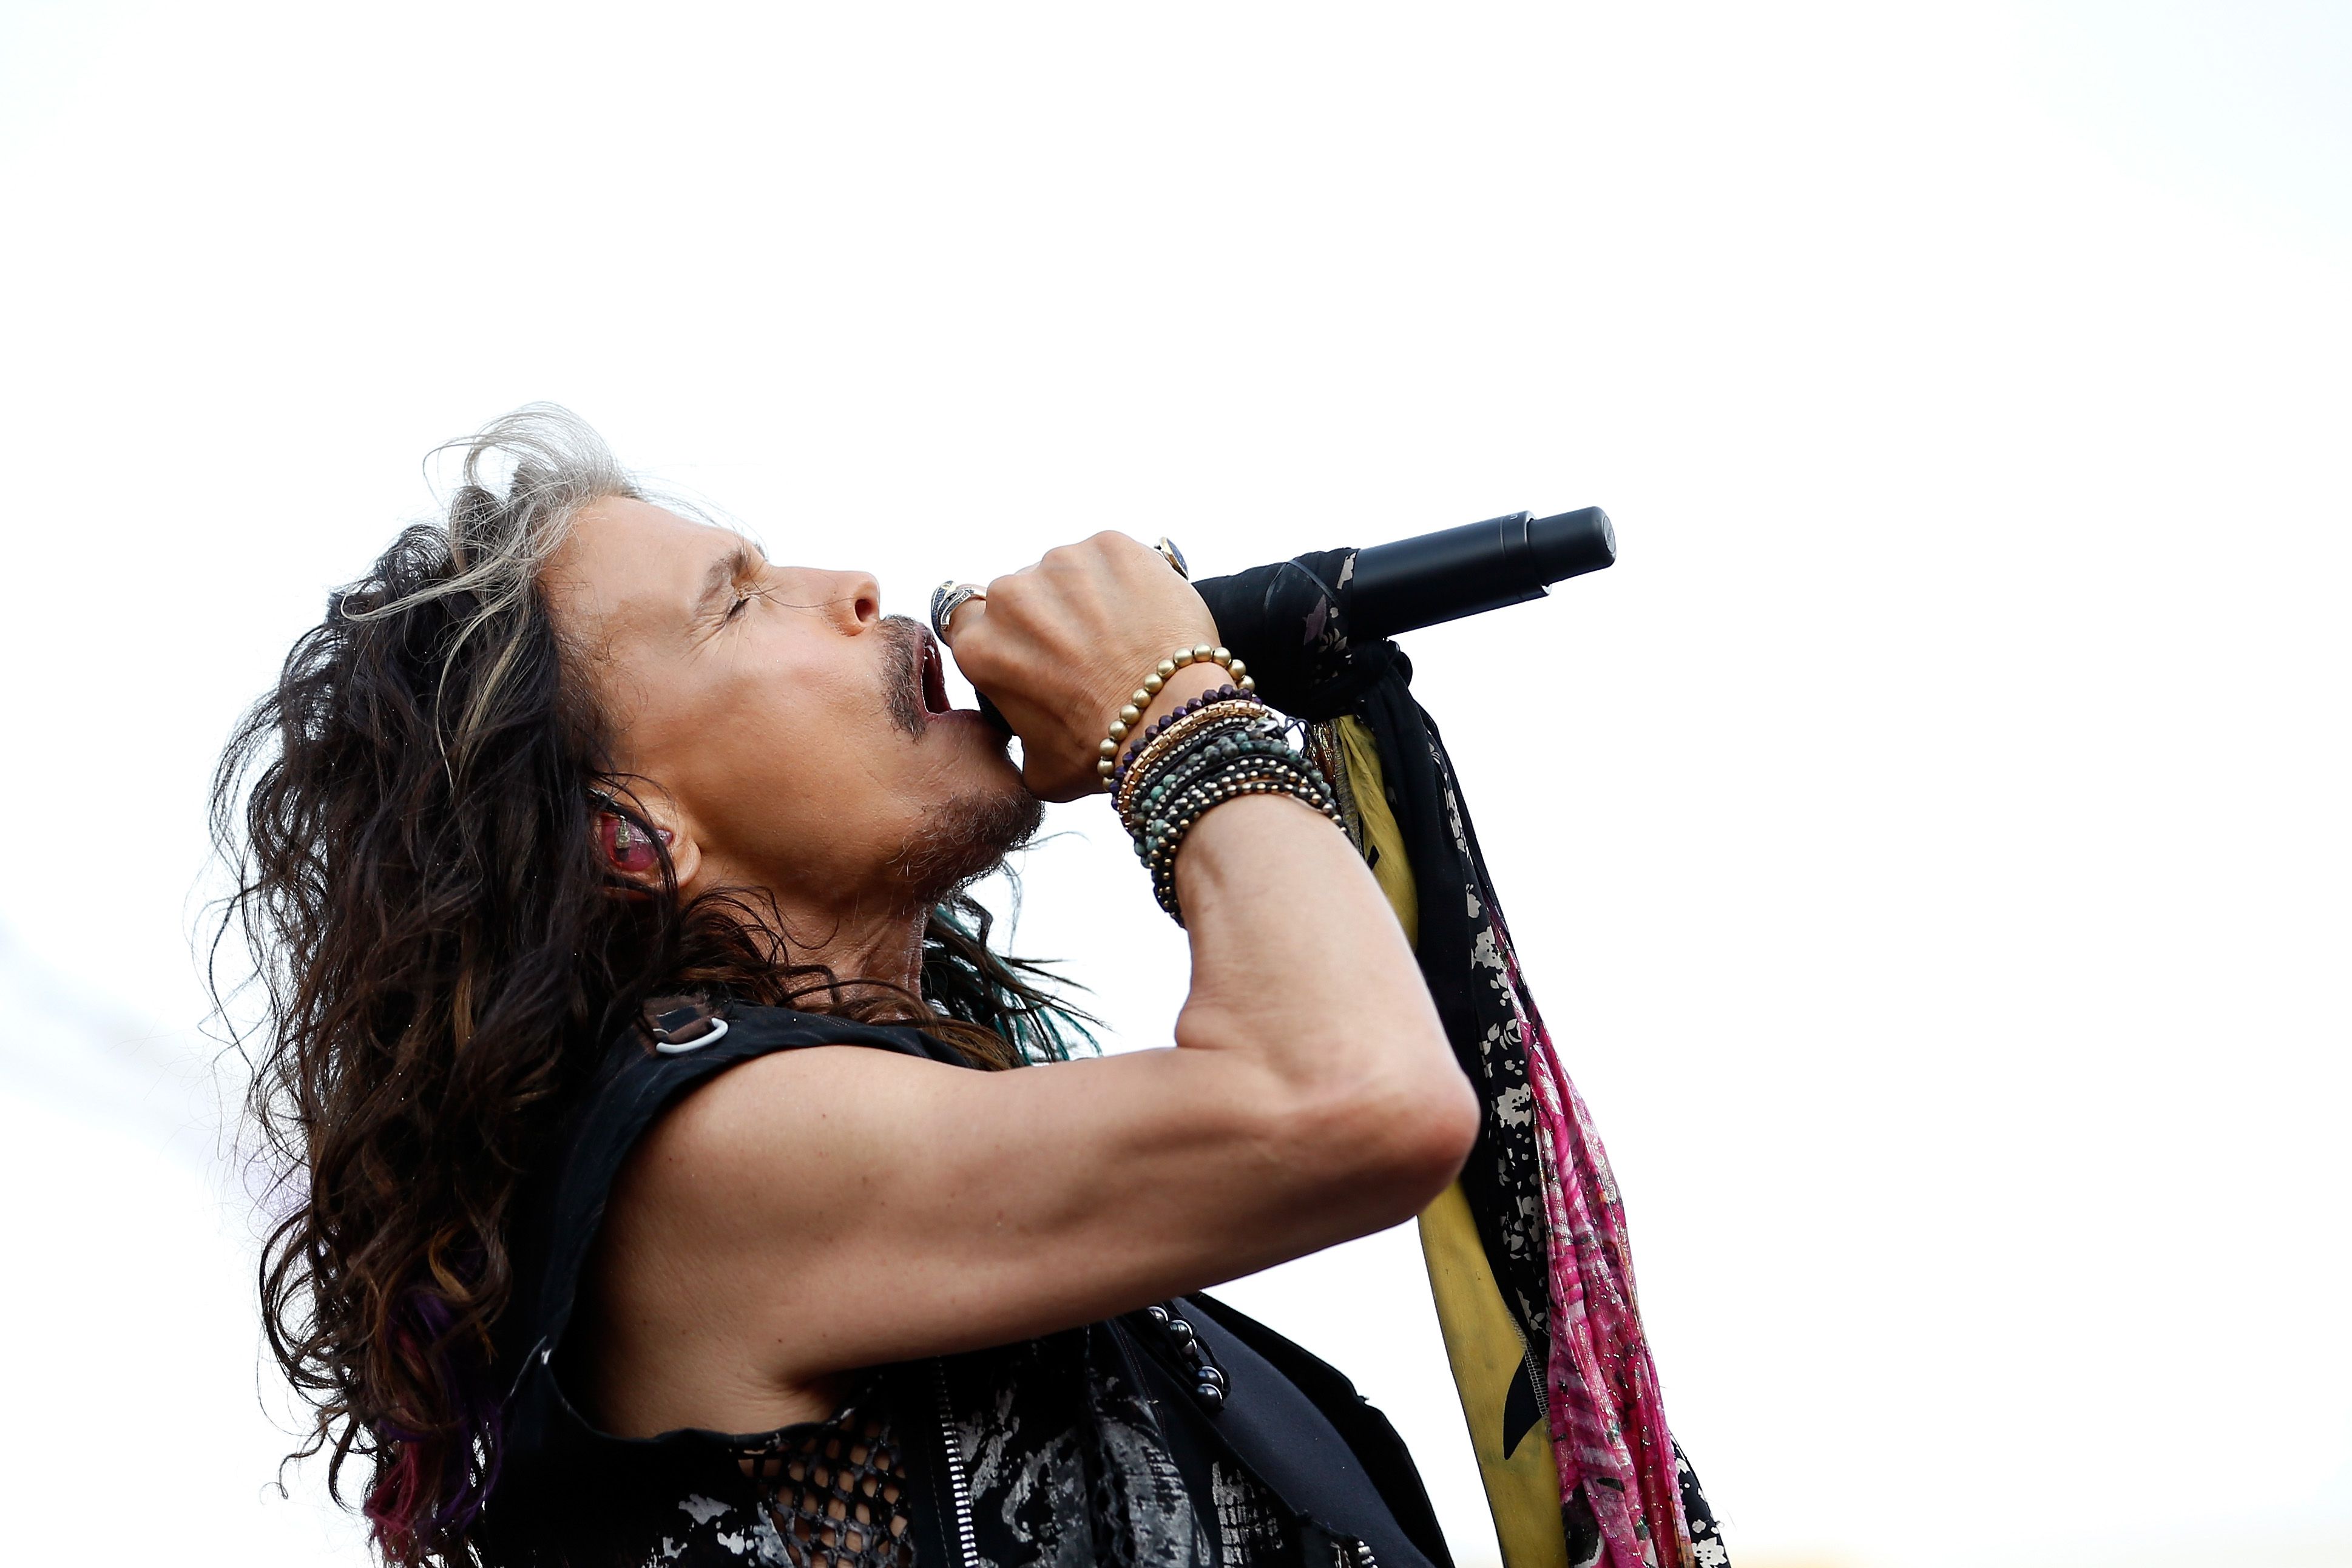 BRISTOL, TN - AUGUST 22: Steven Tyler performs prior to the NASCAR Sprint Cup Series IRWIN Tools Night Race at Bristol Motor Speedway on August 22, 2015 in Bristol, Tennessee. (Photo by Gregory Shamus/Getty Images)